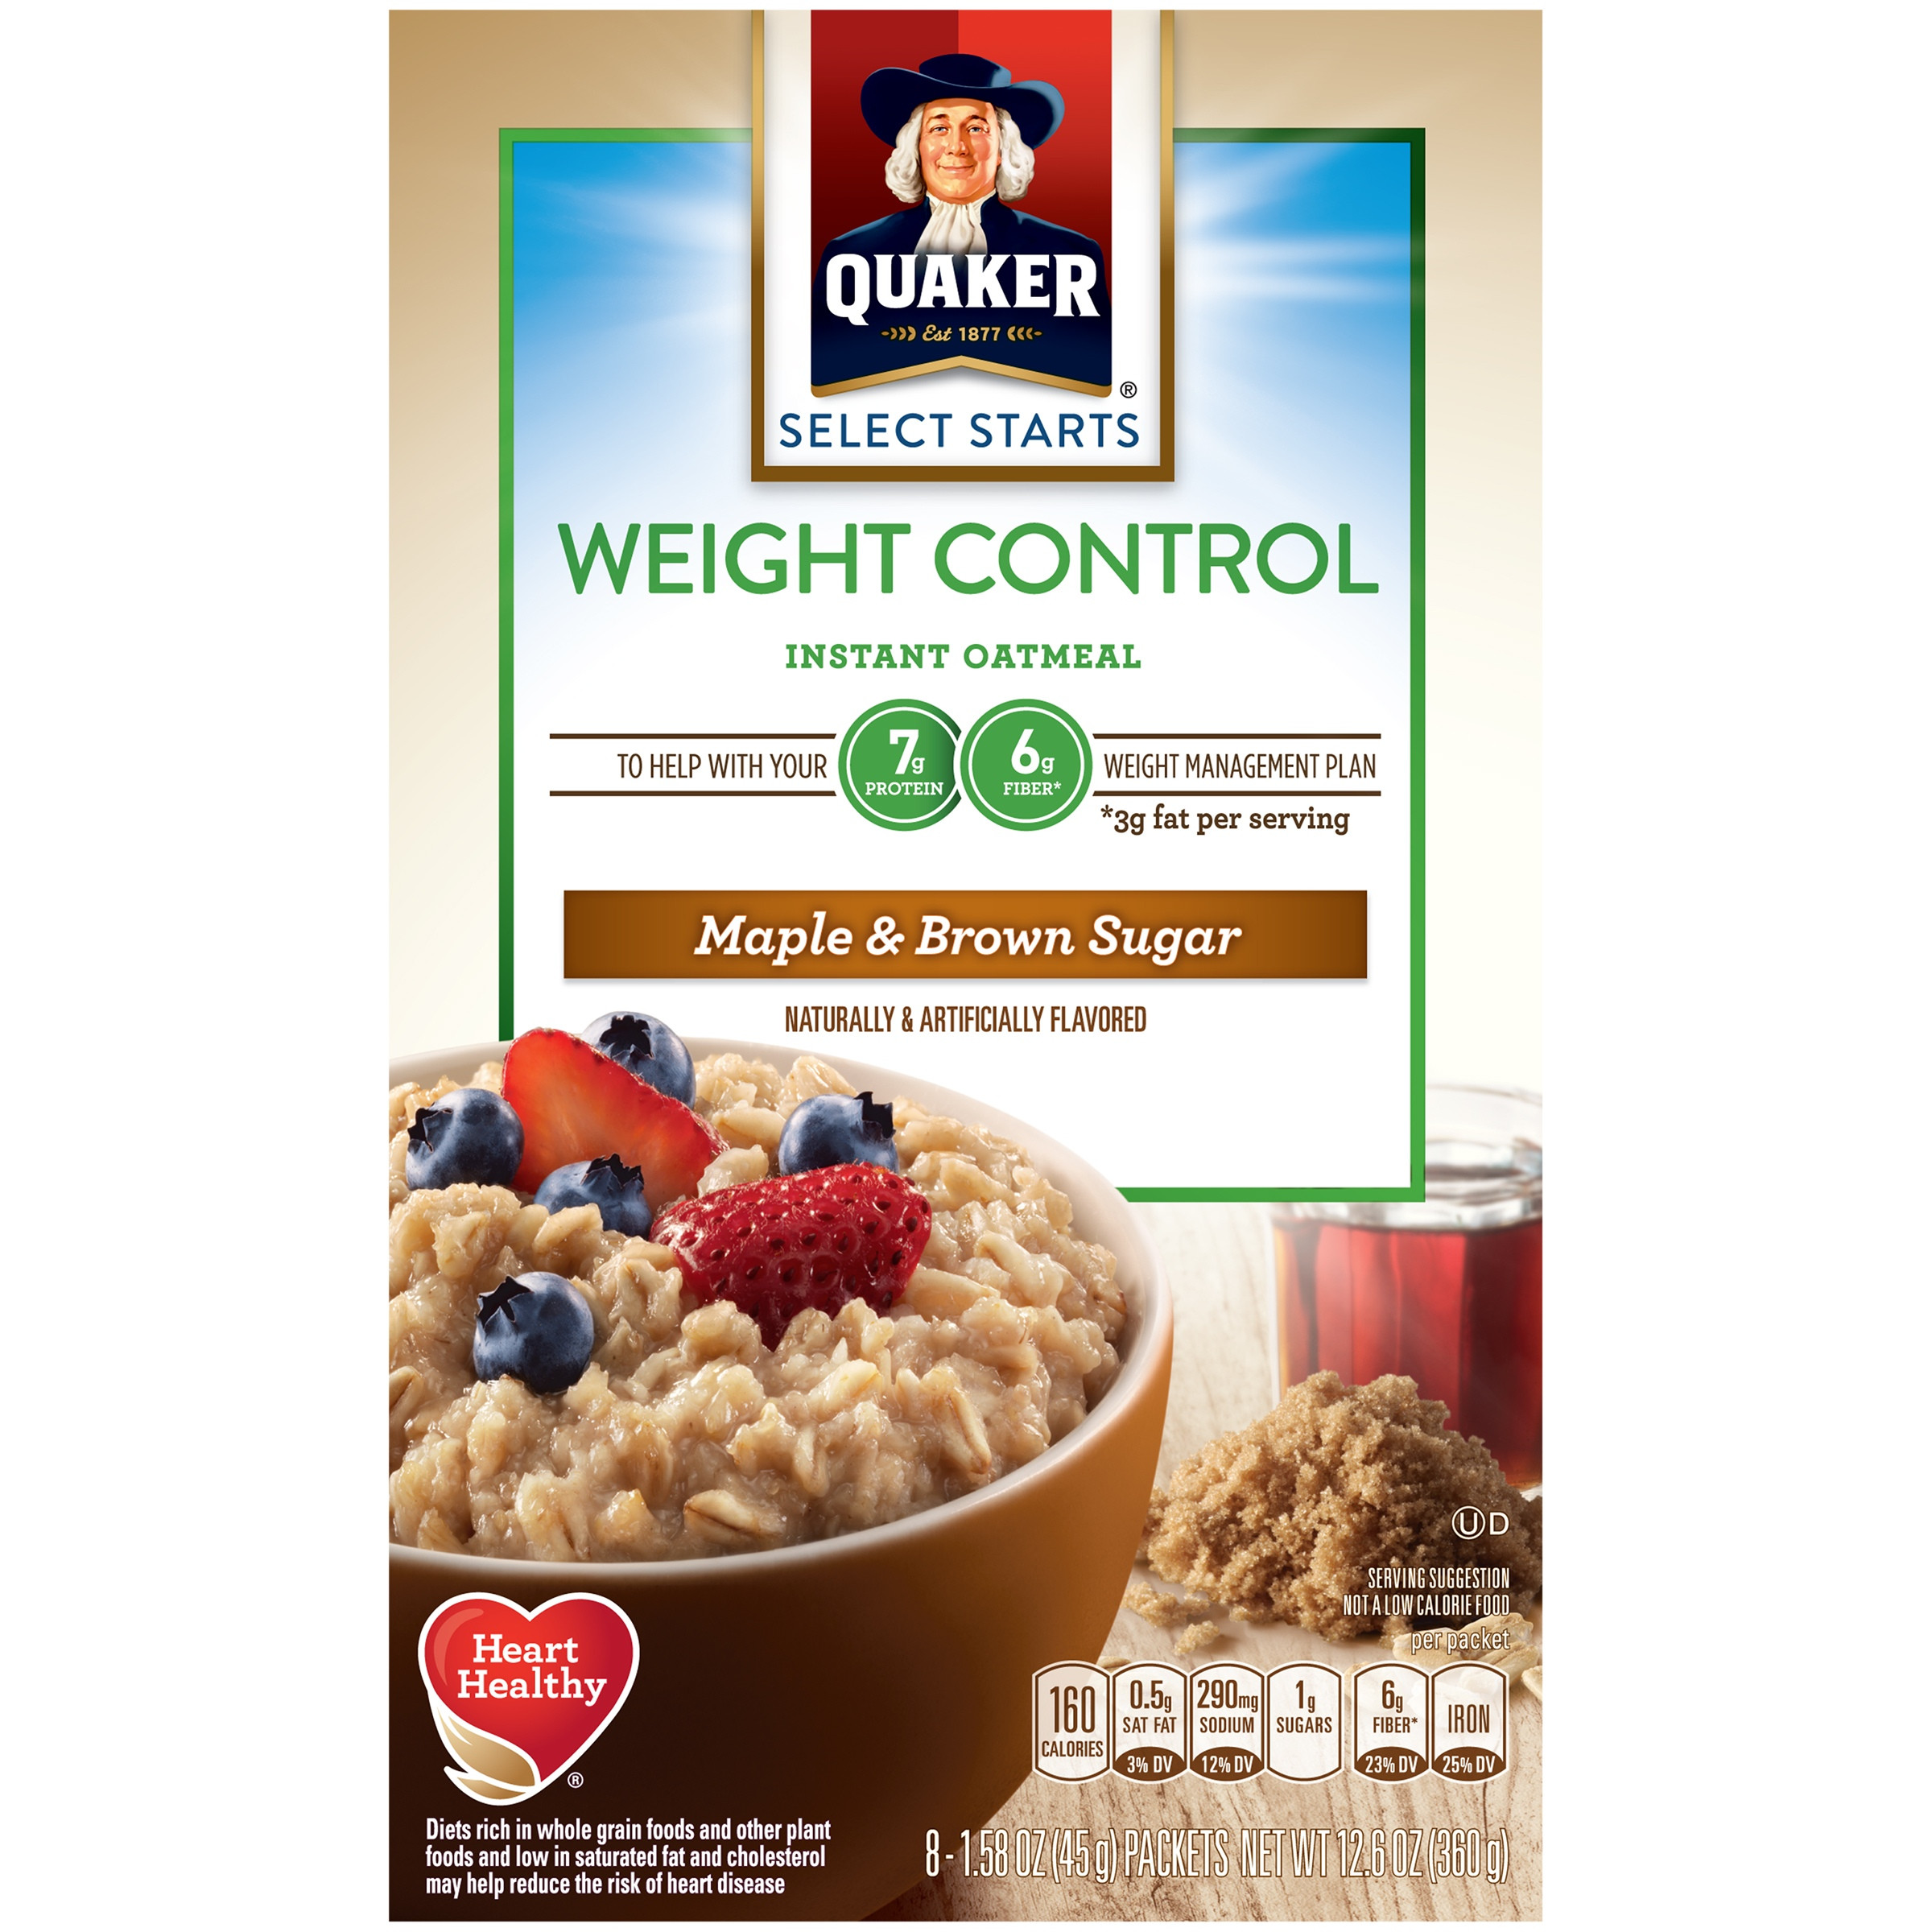 15 Recipes for Great Quaker Oats Weight Control